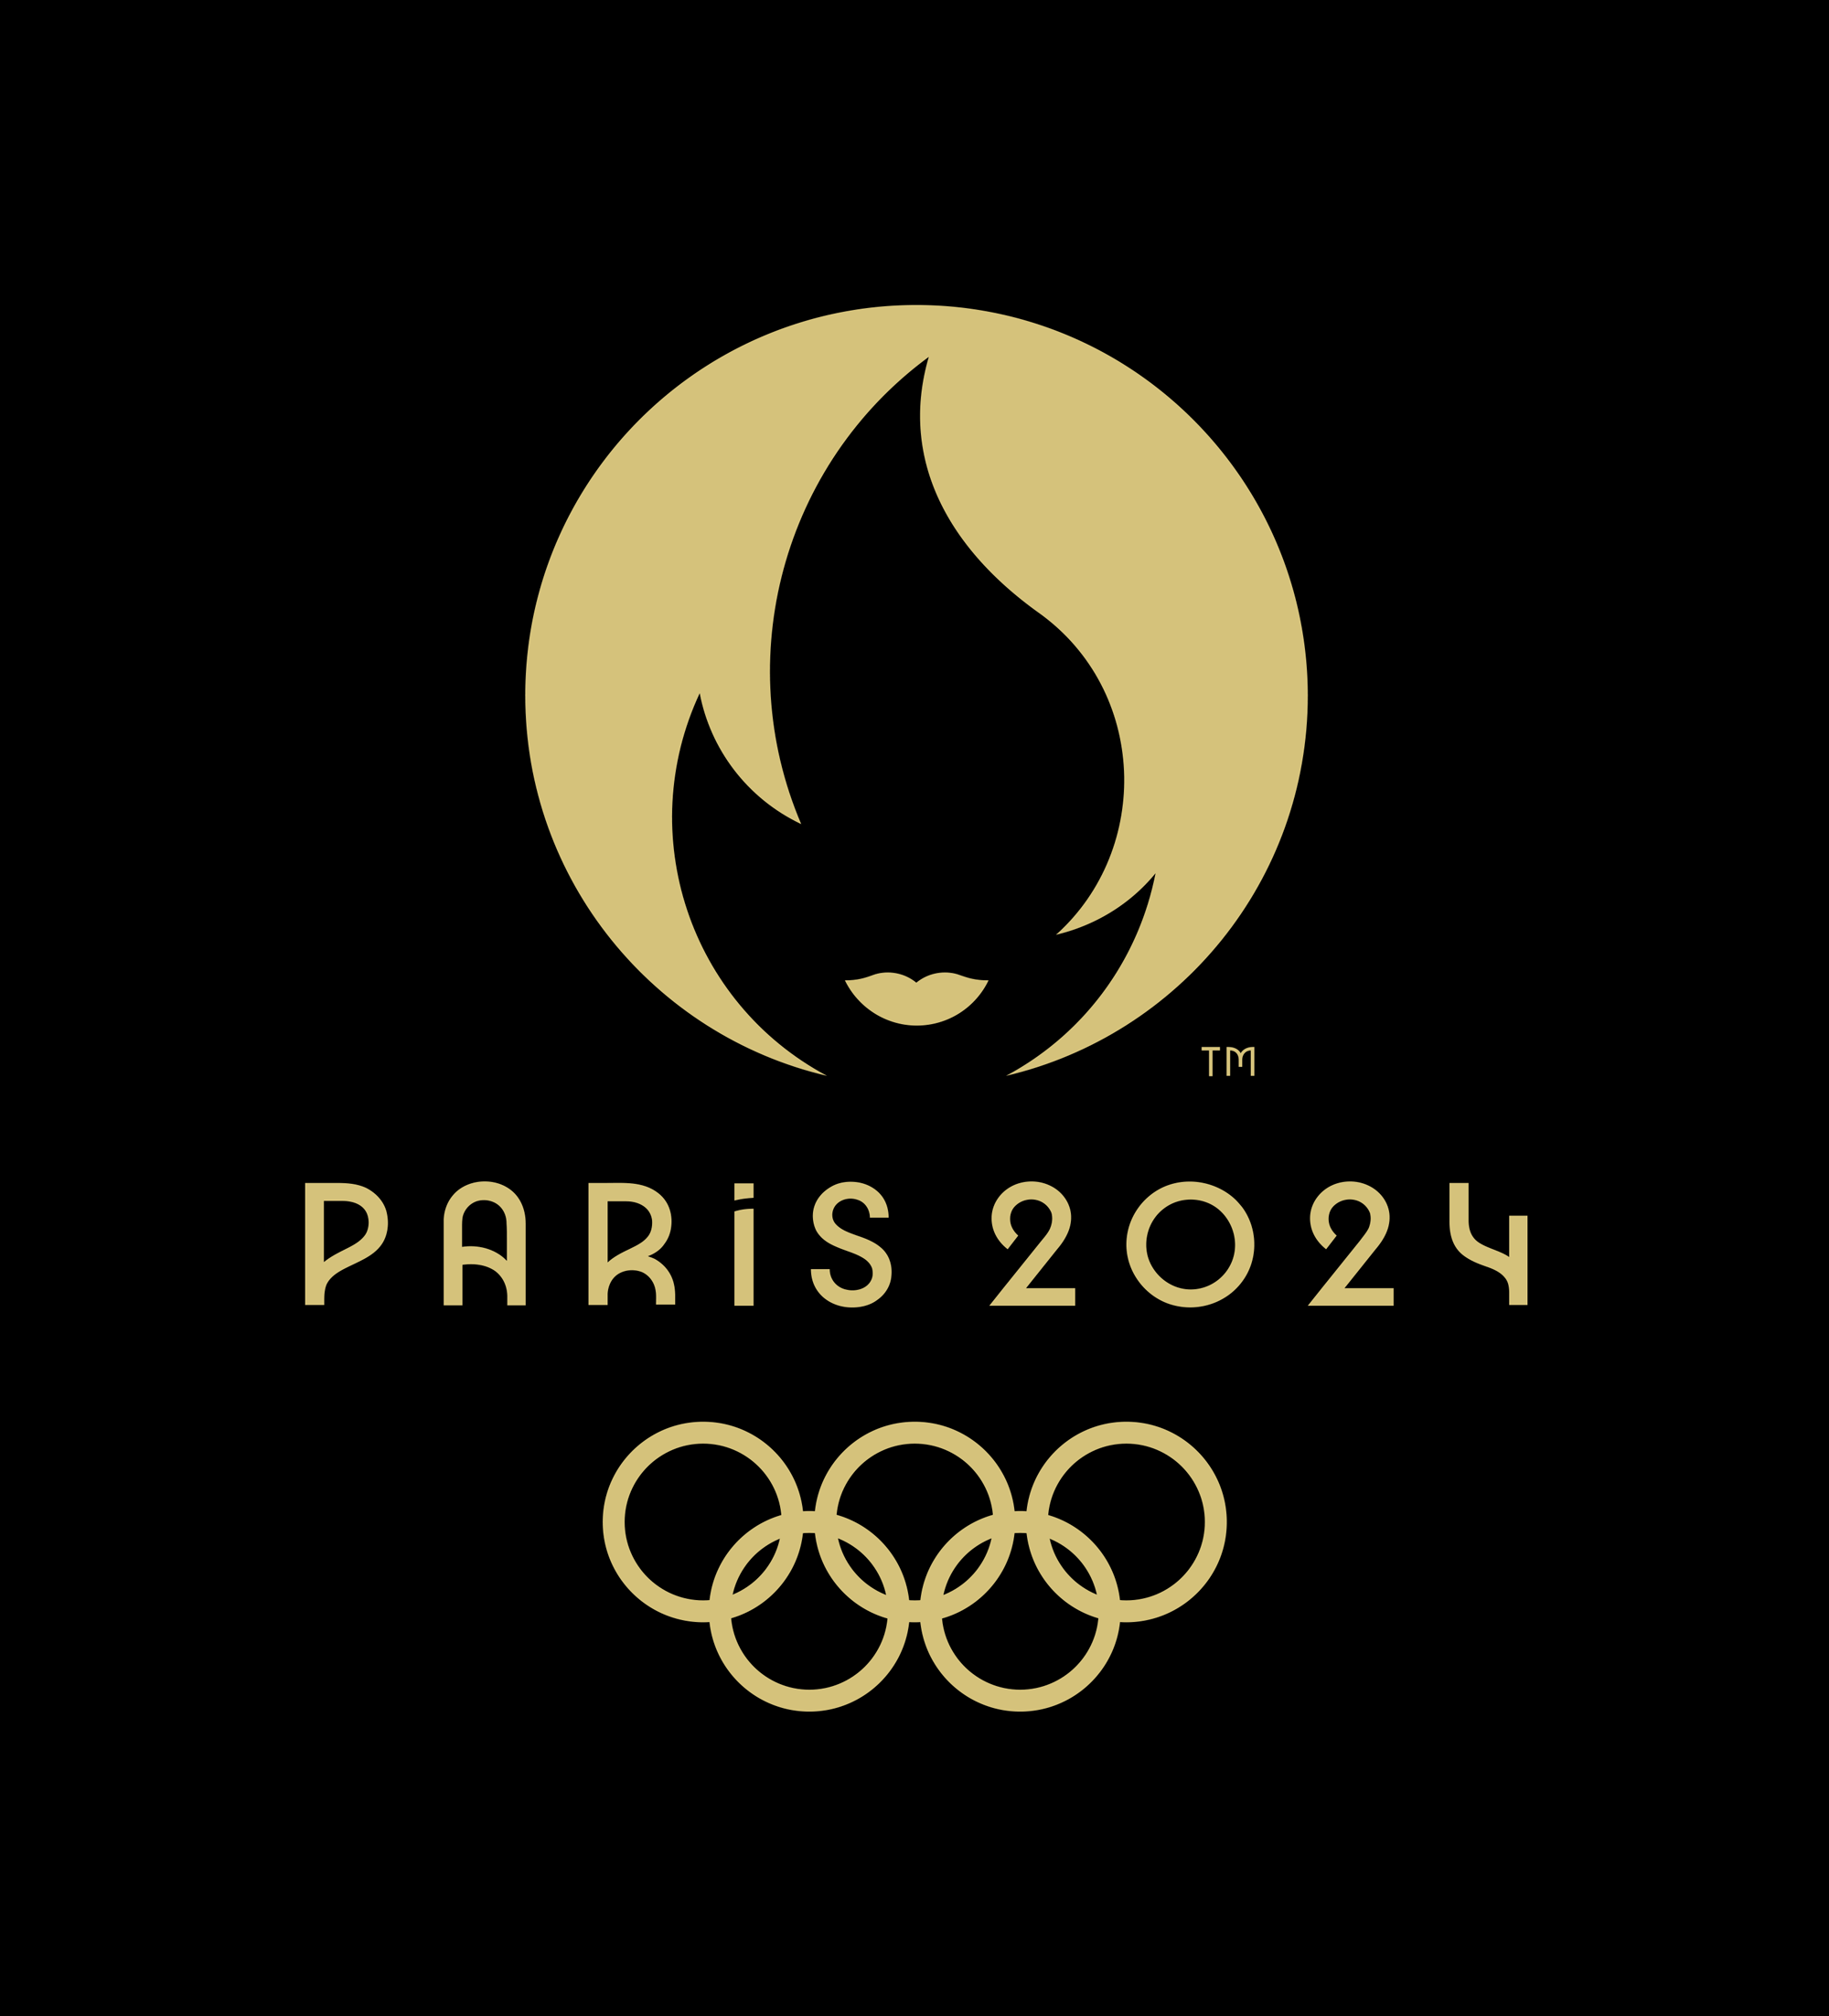 Brand New New Emblem for 2024 Summer Olympics by Royalties Ecobranding